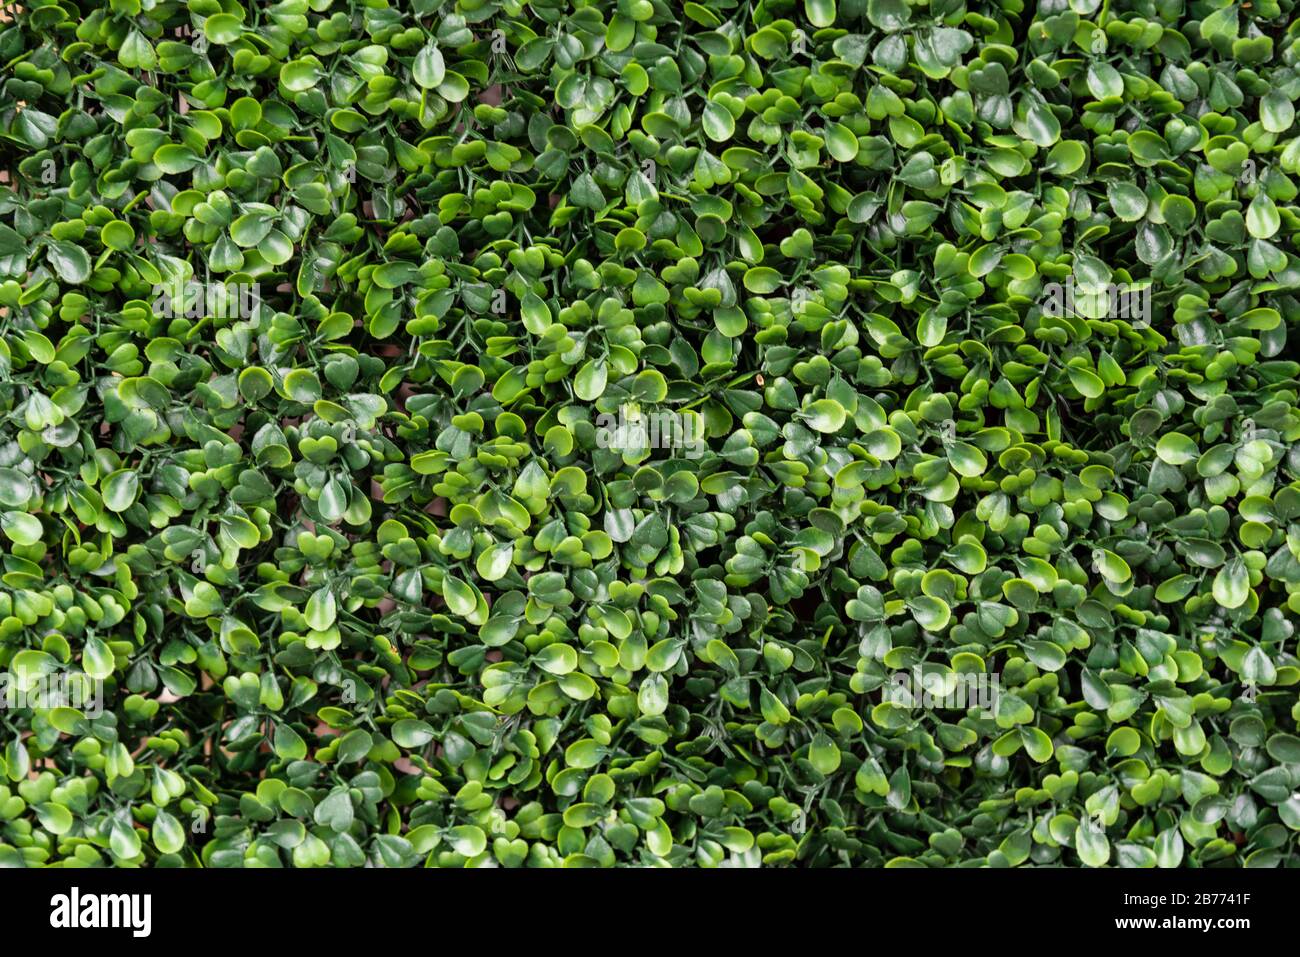 Green plastic grass background for graphic design Stock Photo